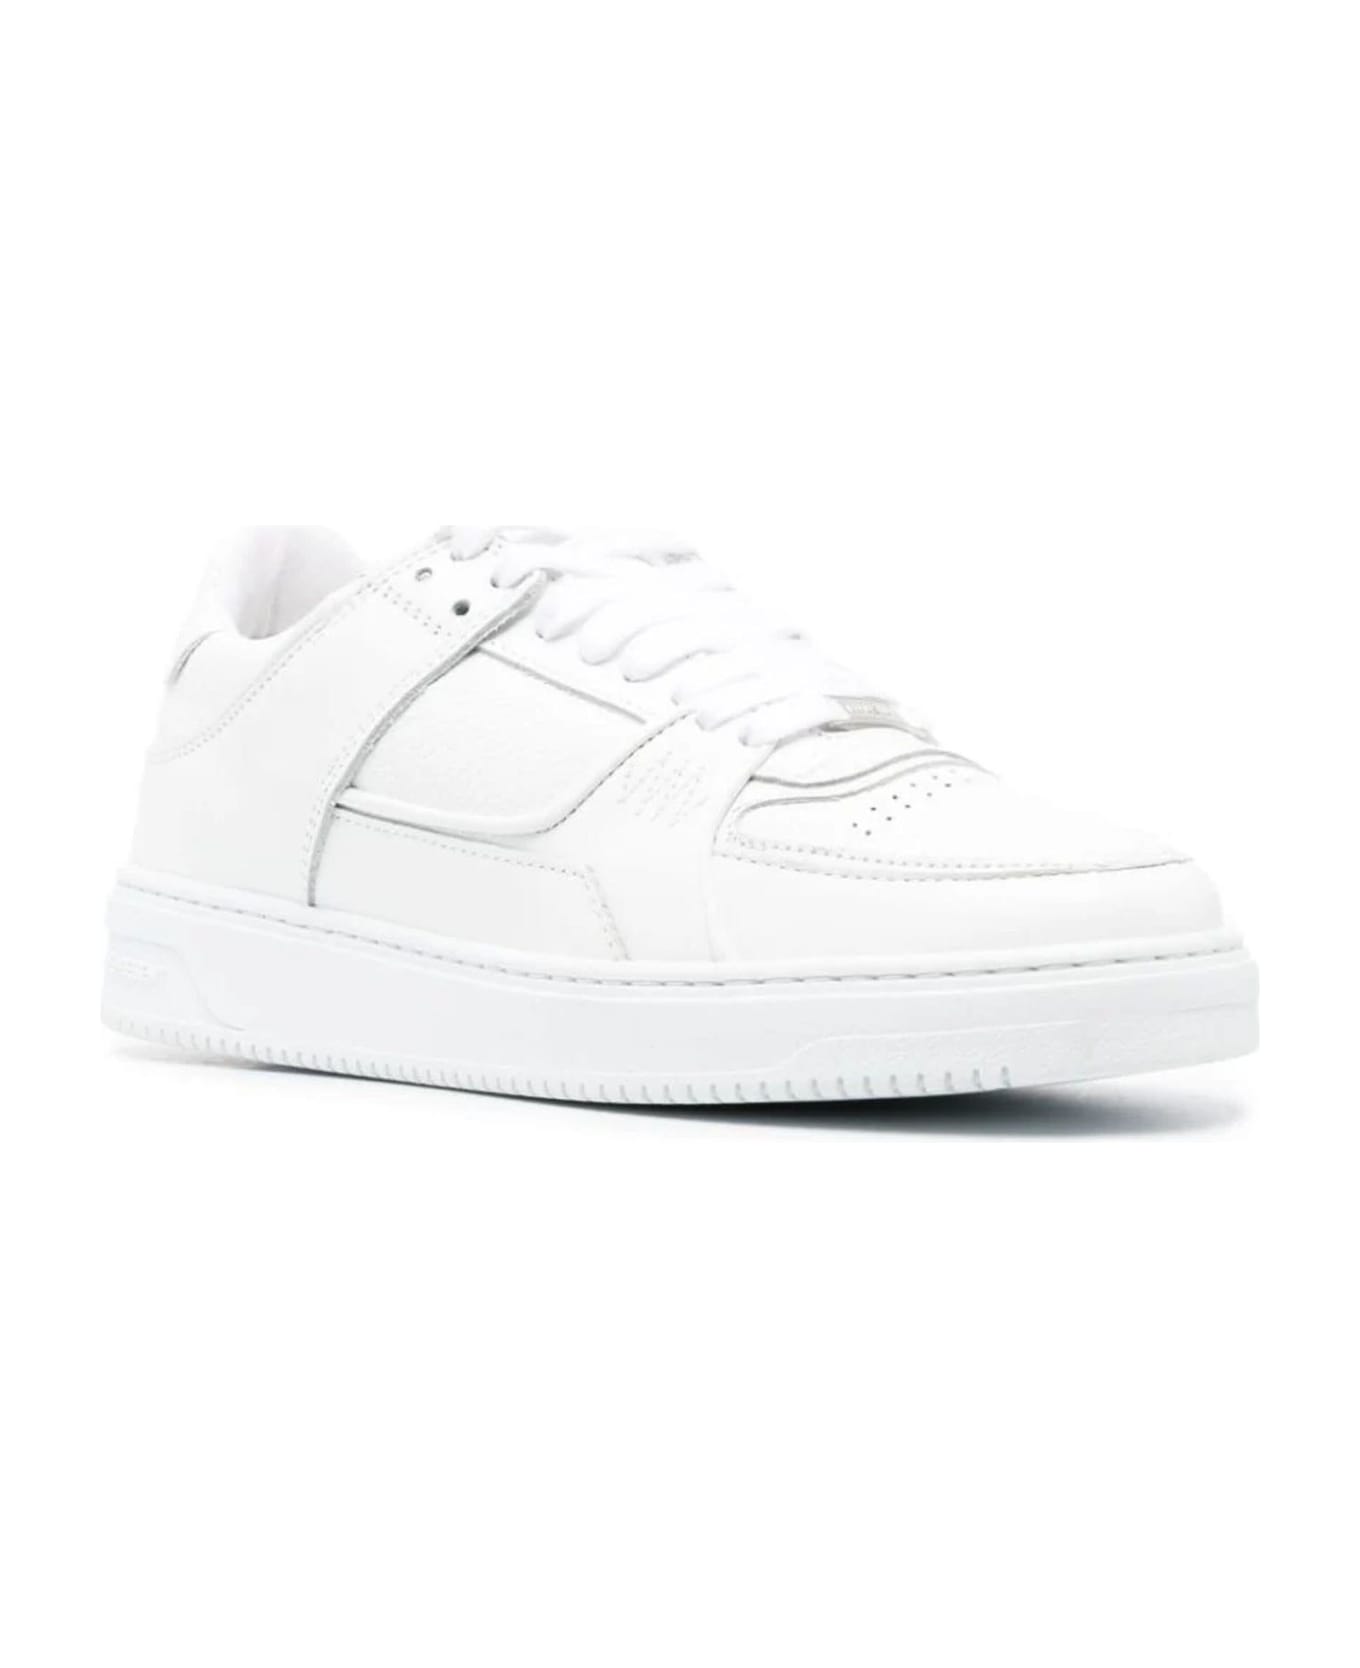 REPRESENT White Calf Leather Apex Sneakers Sneakers - FLAT WHITE スニーカー